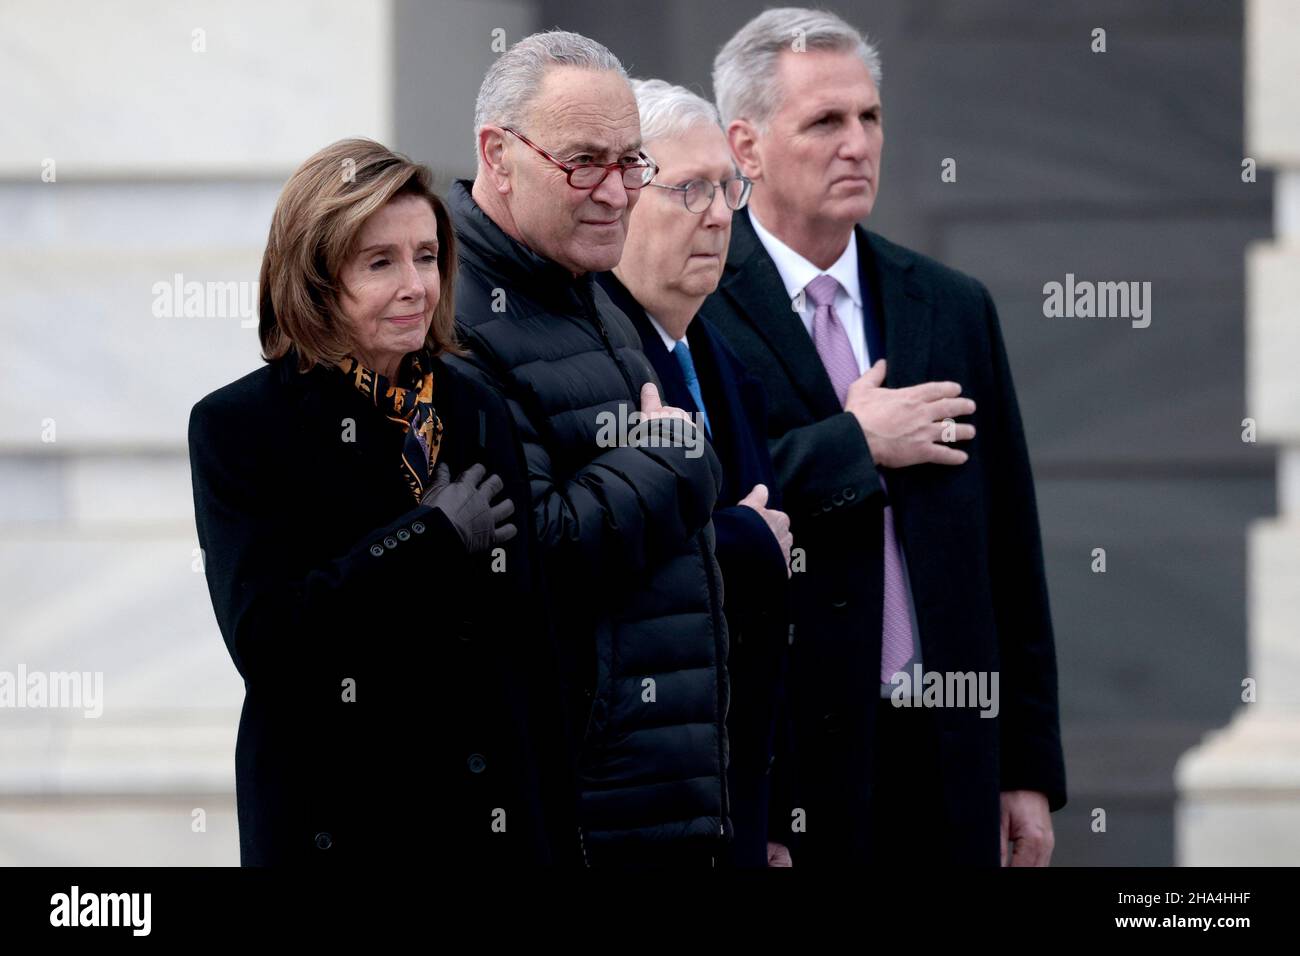 WASHINGTON, DC - DECEMBER 10: Speaker of the House Nancy Pelosi (D-CA), Majority Leader Charles Schumer (D-NY), Minority Leader Mitch McConnell (R-KY) and House Minority Leader Kevin McCarthy (R-CA) watch as joint services military honor guard carries the casket of the late Sen. Robert Dole (R-KS) down the steps of the U.S. Capitol after lying in state on December 10, 2021 in Washington, DC. Dole, a veteran who was severely injured in World War II, was a Republican Senator from Kansas from 1969 to 1996. He ran for president three times and became the Republican nominee for president in 1996. ( Stock Photo